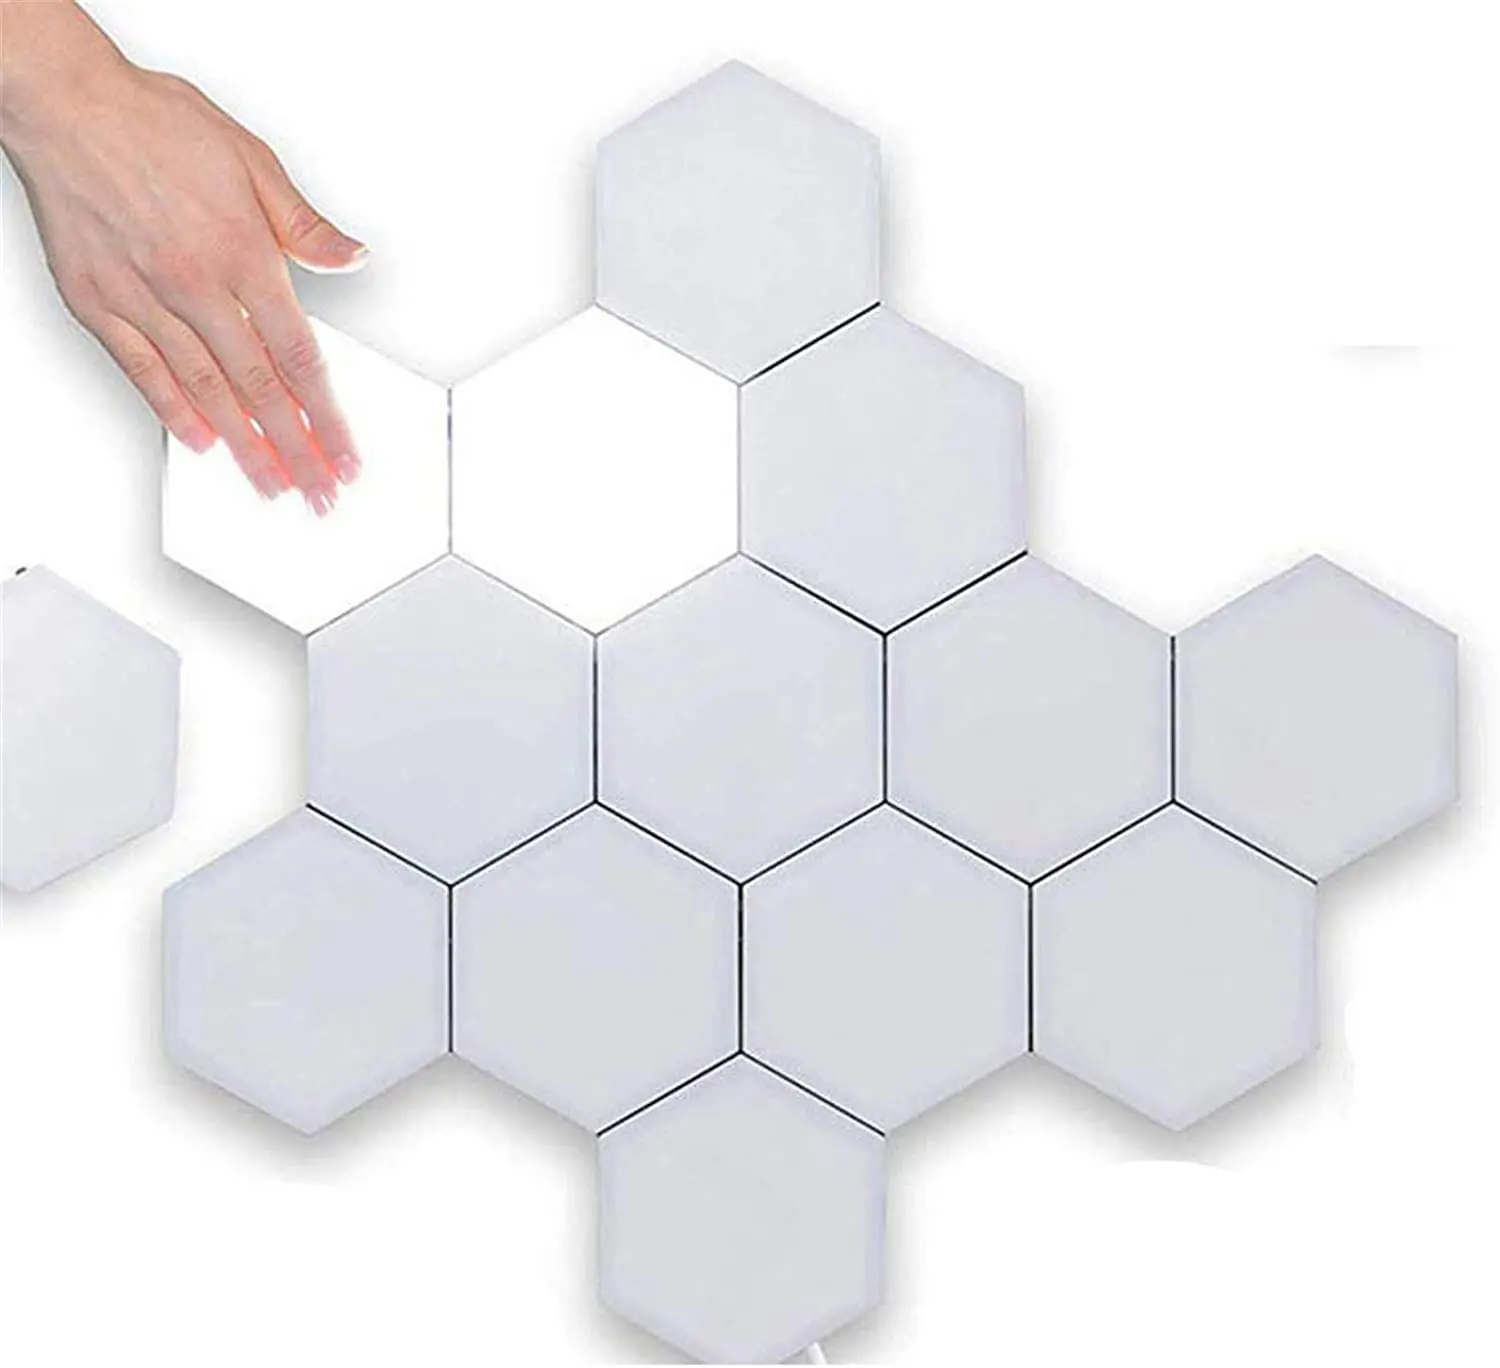 DIY LED Magnetic Touch Lamp Hexagon Led Light for Ceiling From m.alibaba.com